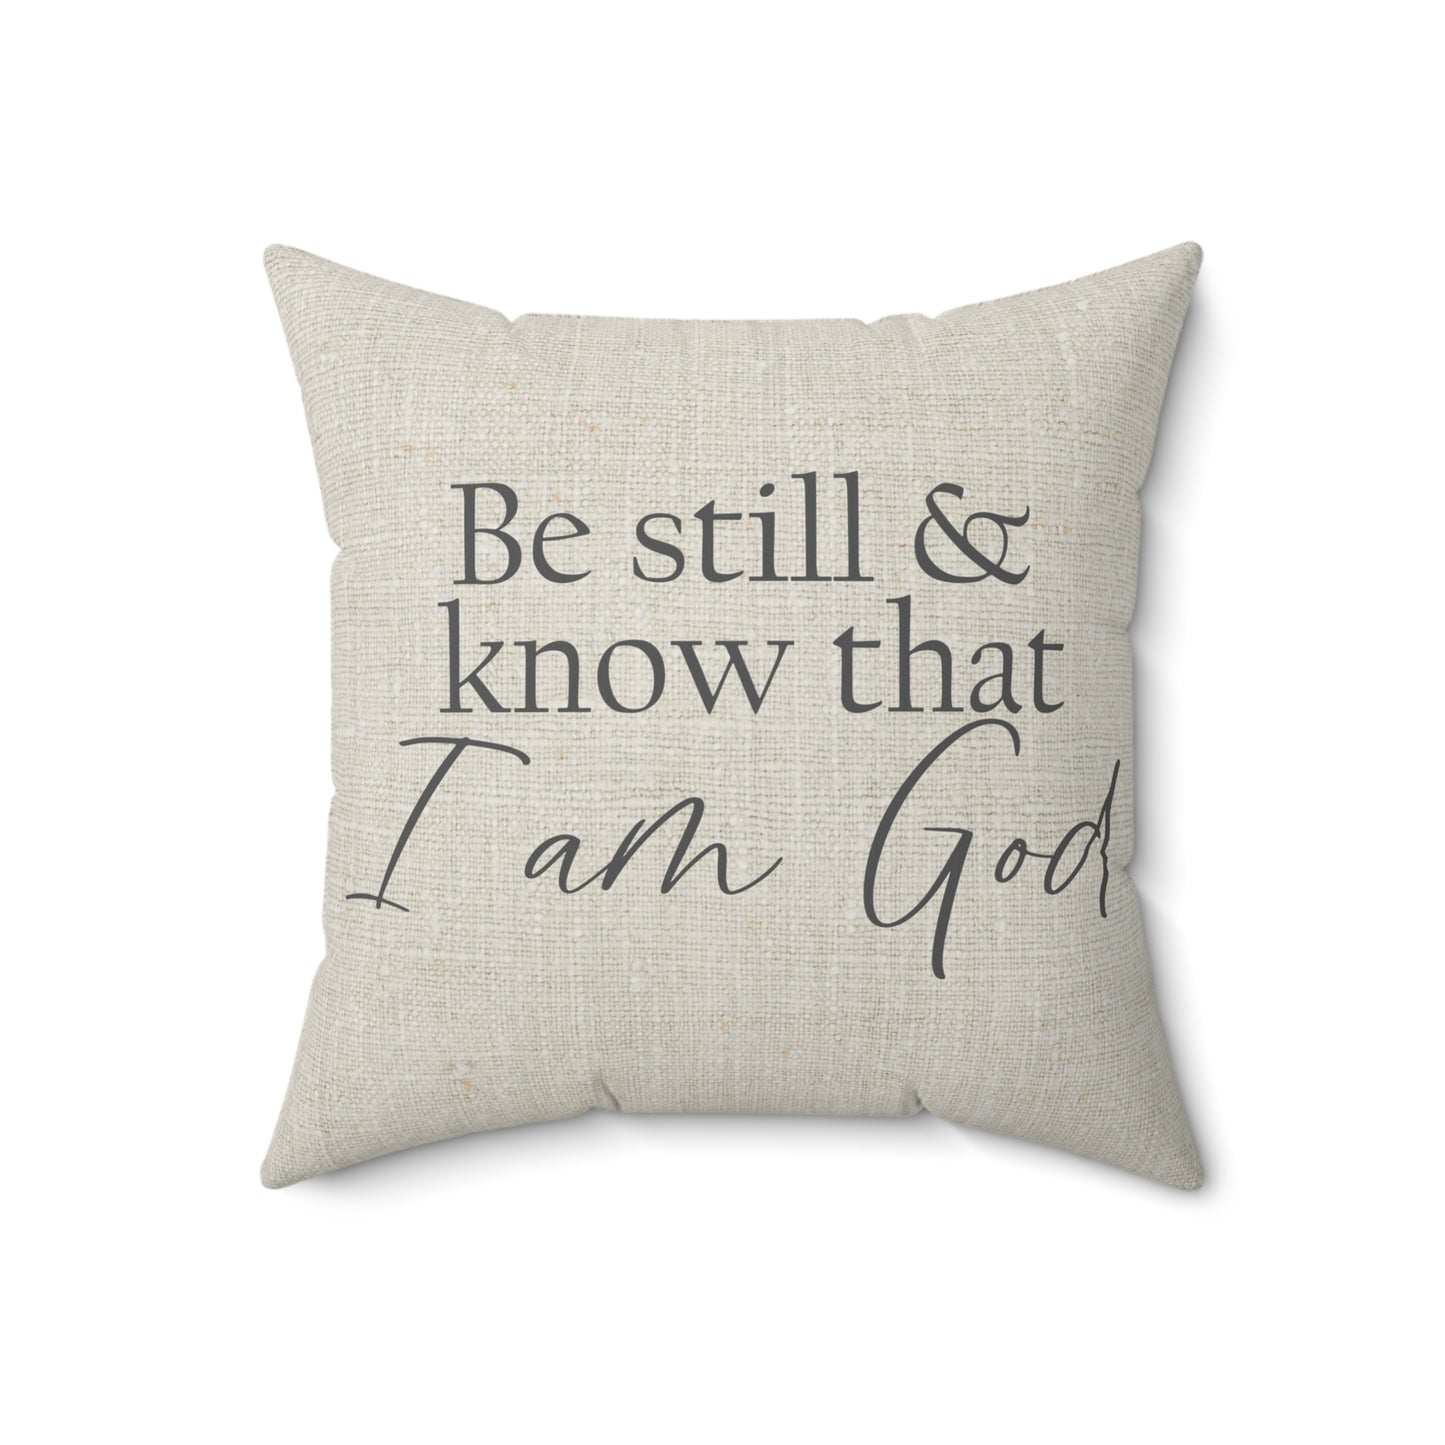 "Be Still & Know That I Am God" Throw Pillow - Weave Got Gifts - Unique Gifts You Won’t Find Anywhere Else!